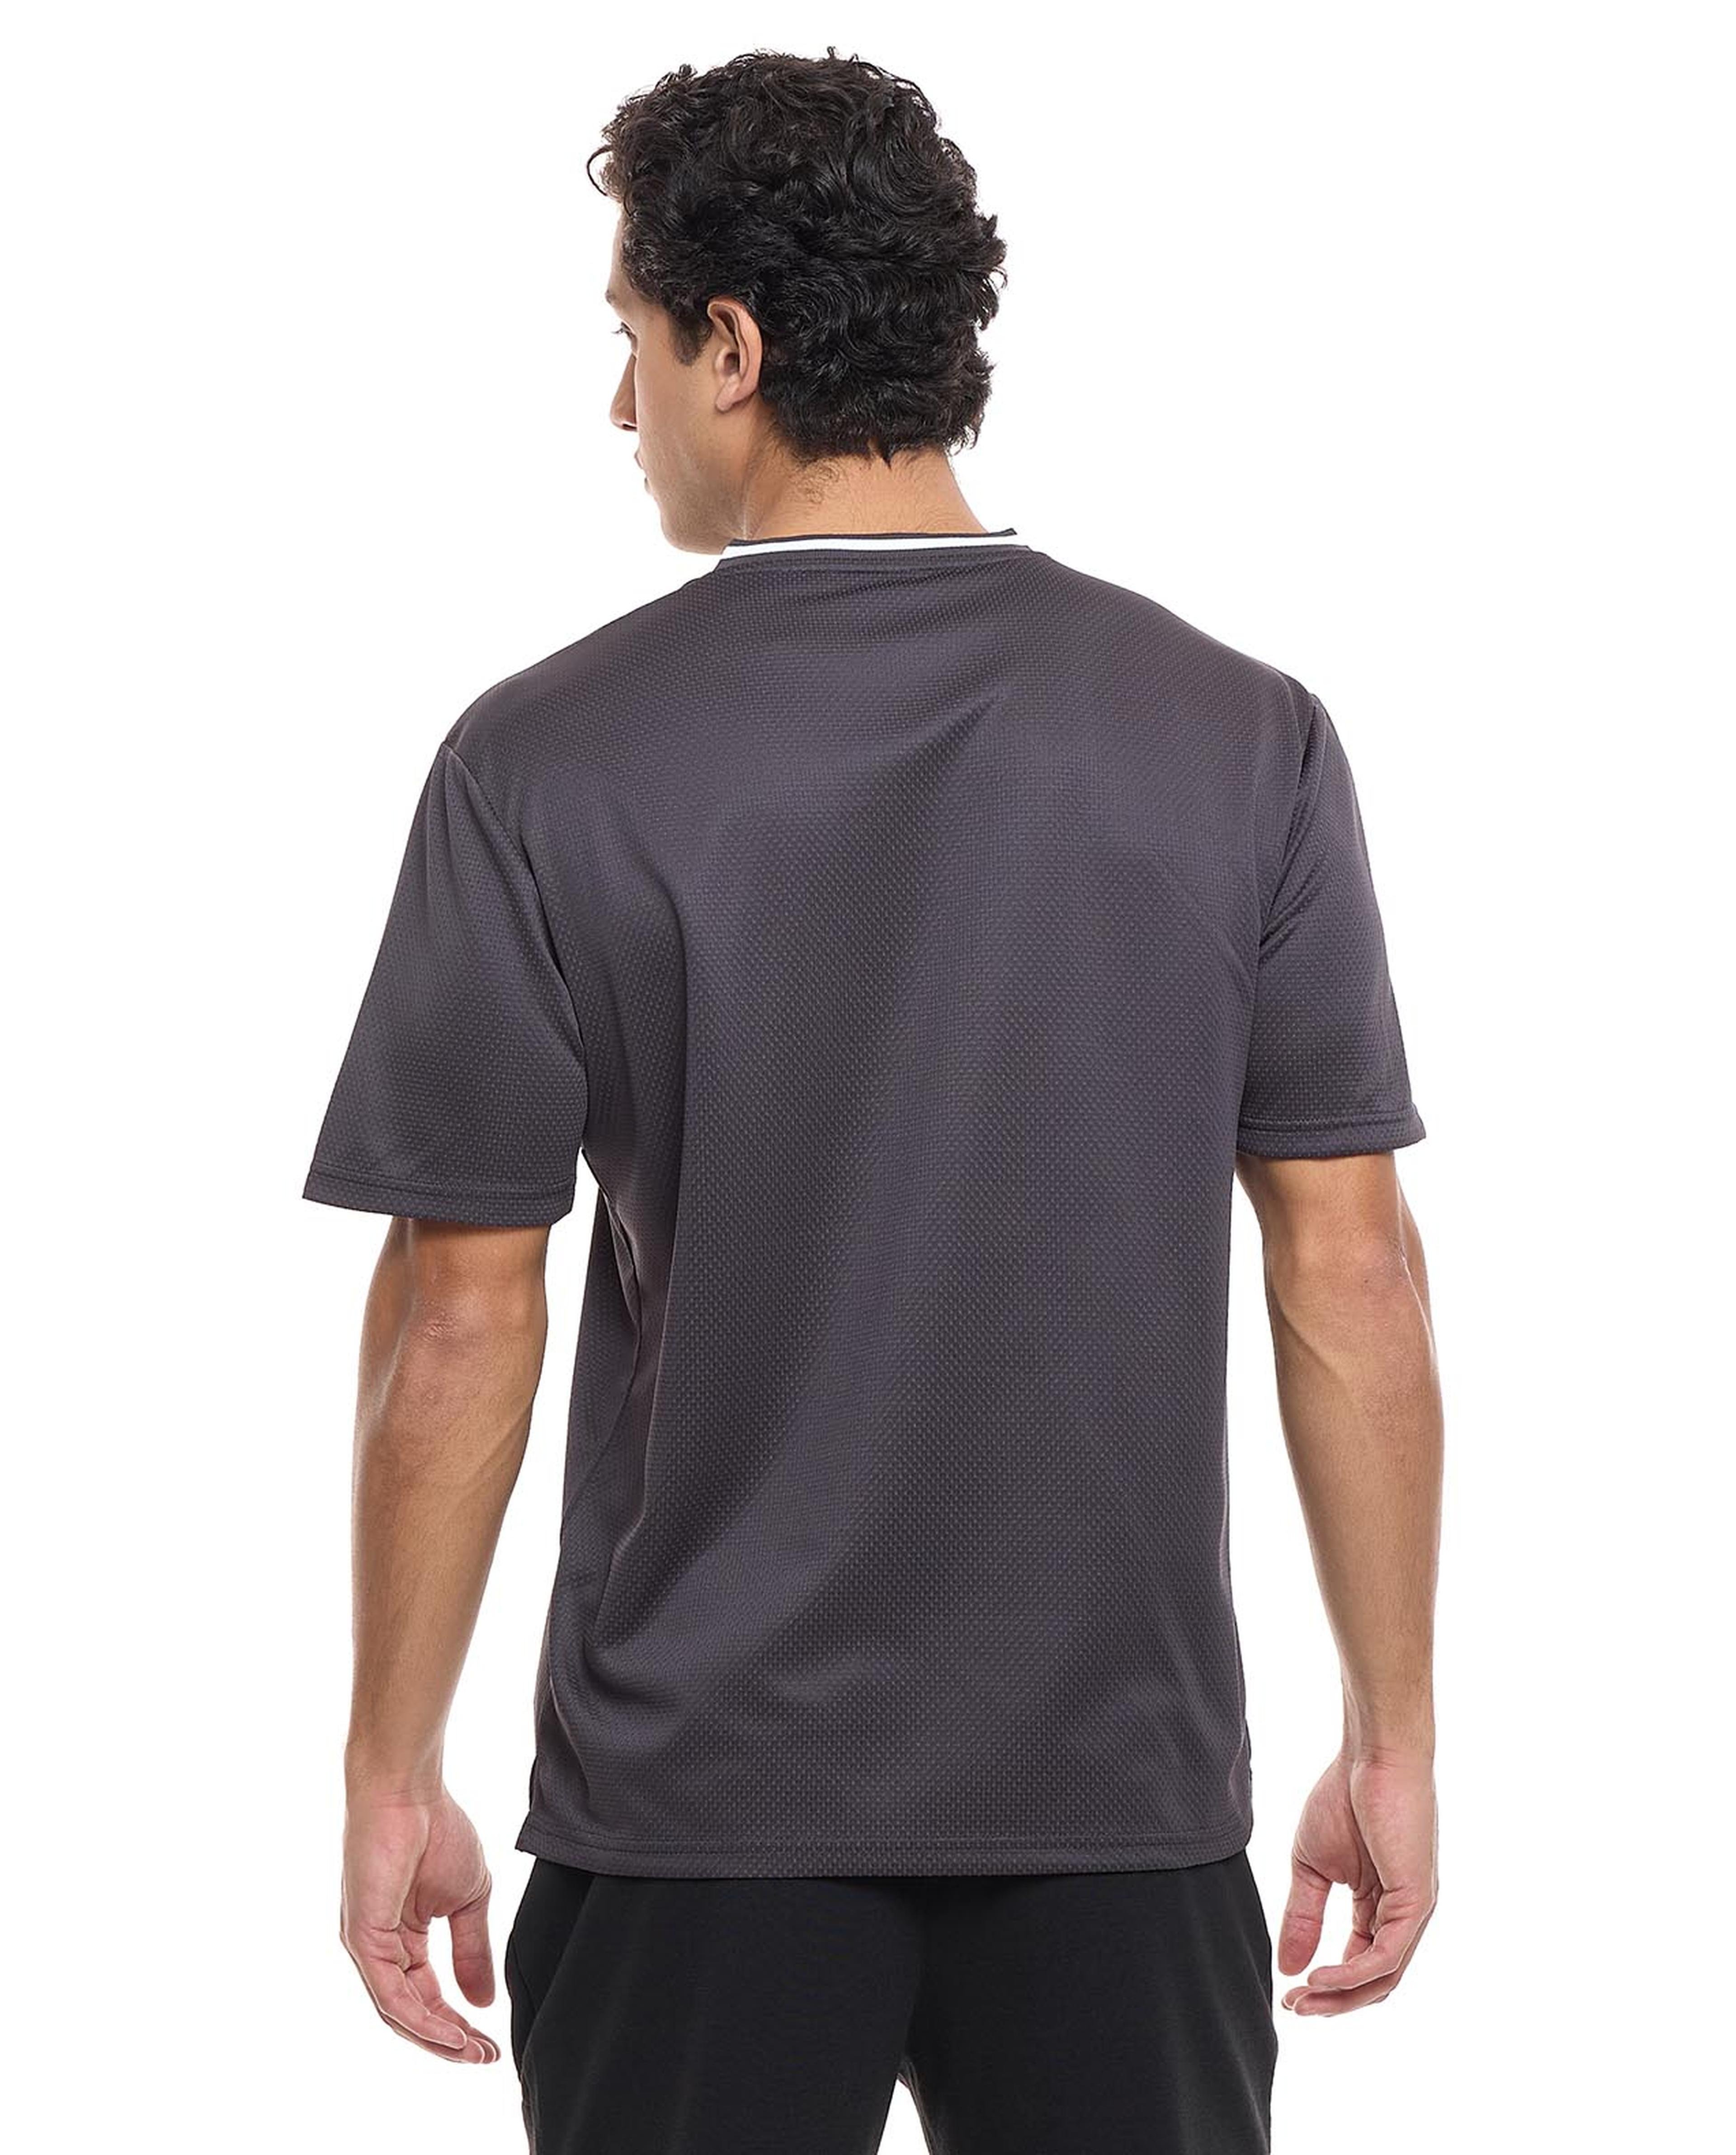 Printed Active T-Shirt with V-Neck and Short Sleeves